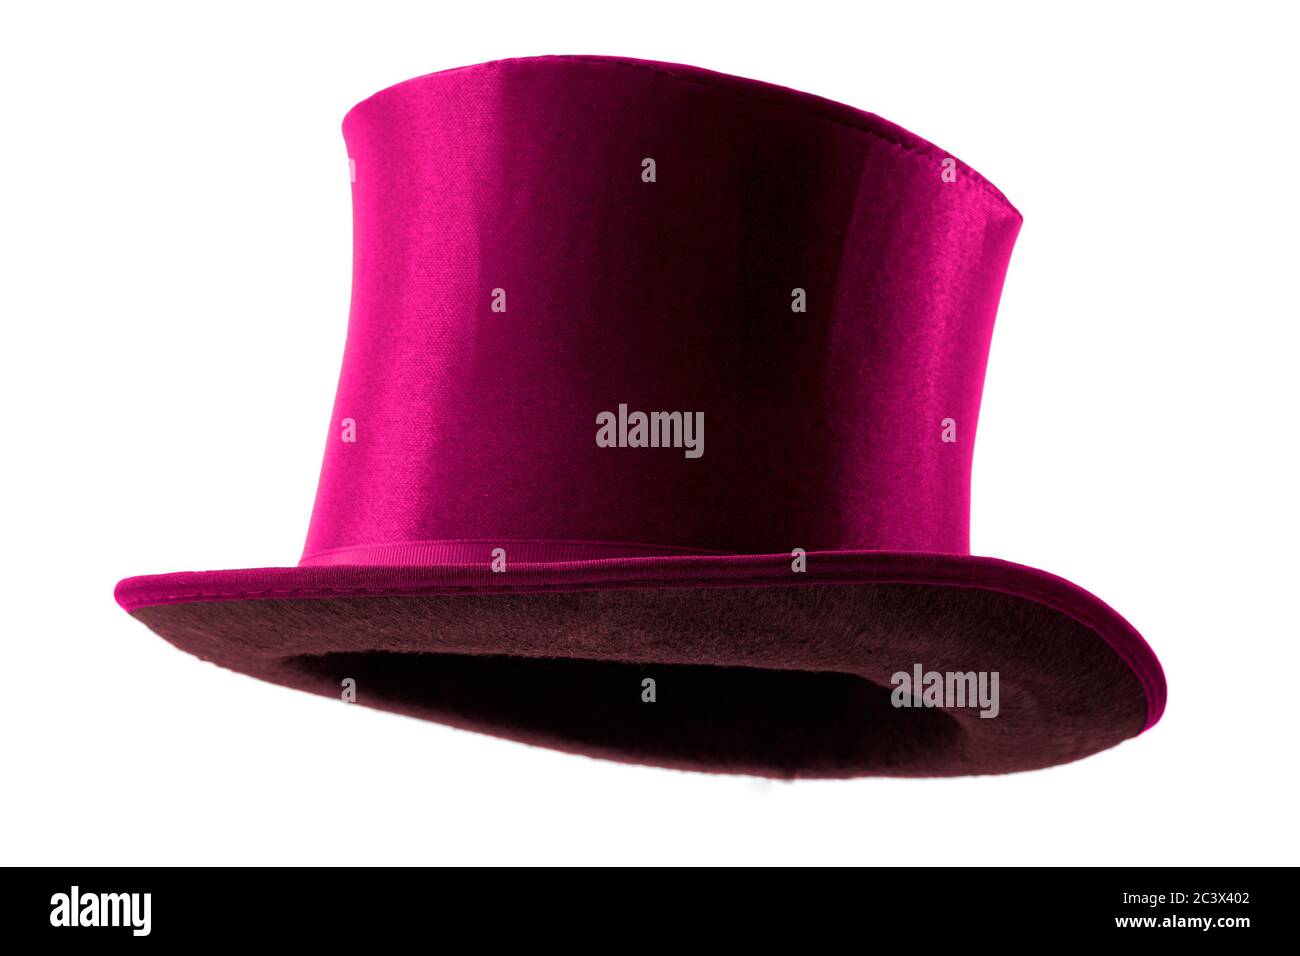 Stylish attire, vintage men fashion and magic show conceptual idea with 3/4 angle on victorian pink top hat with clipping path cutout in ghost mannequ Stock Photo